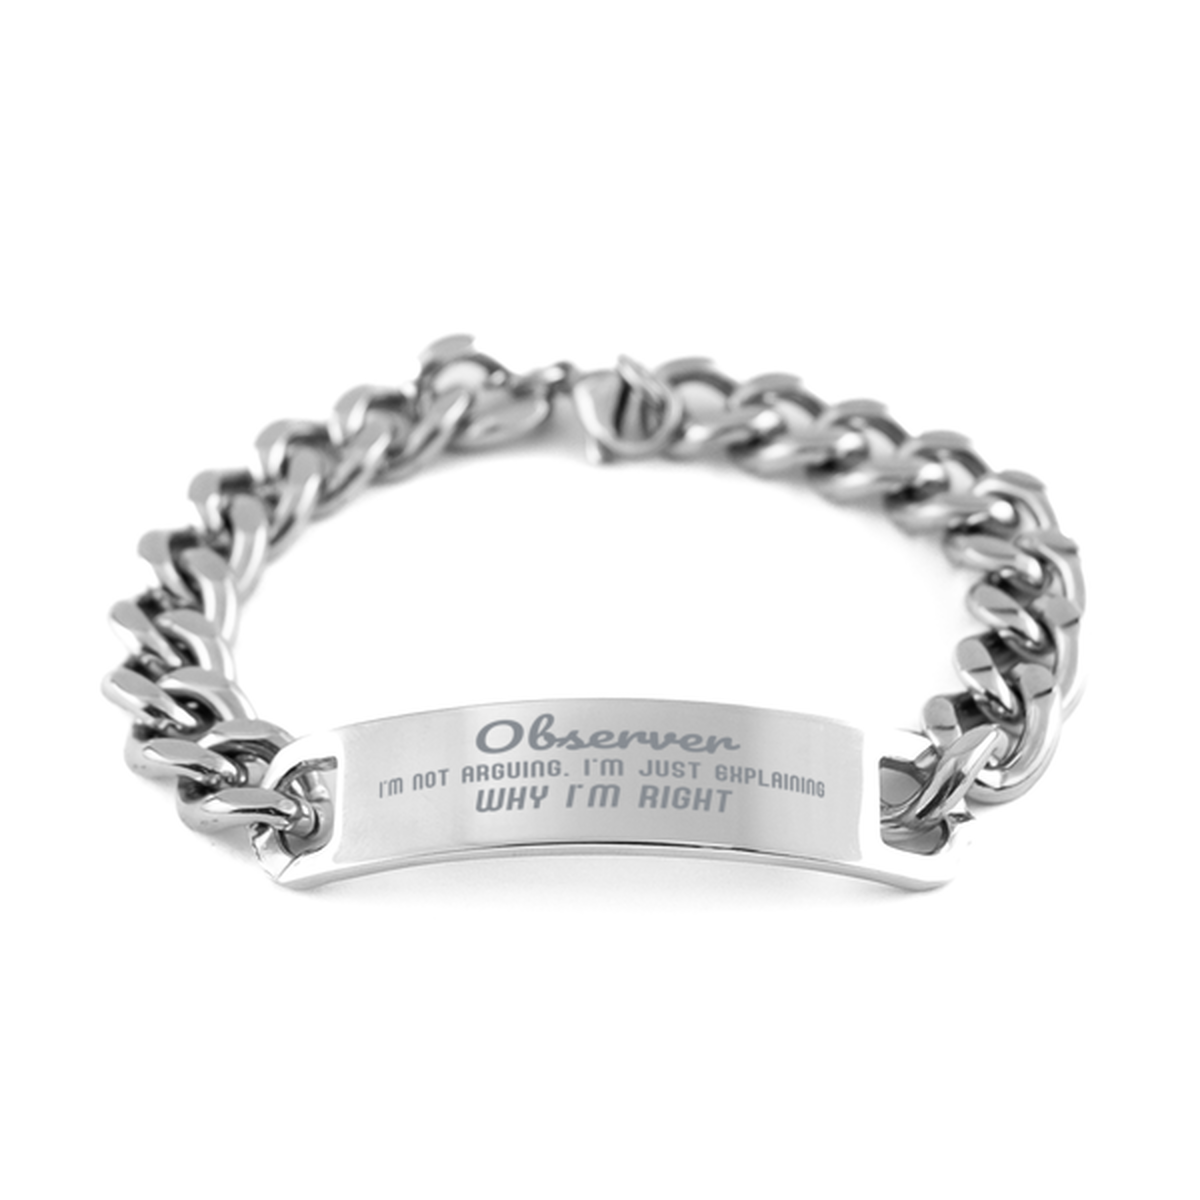 Observer I'm not Arguing. I'm Just Explaining Why I'm RIGHT Cuban Chain Stainless Steel Bracelet, Graduation Birthday Christmas Observer Gifts For Observer Funny Saying Quote Present for Men Women Coworker